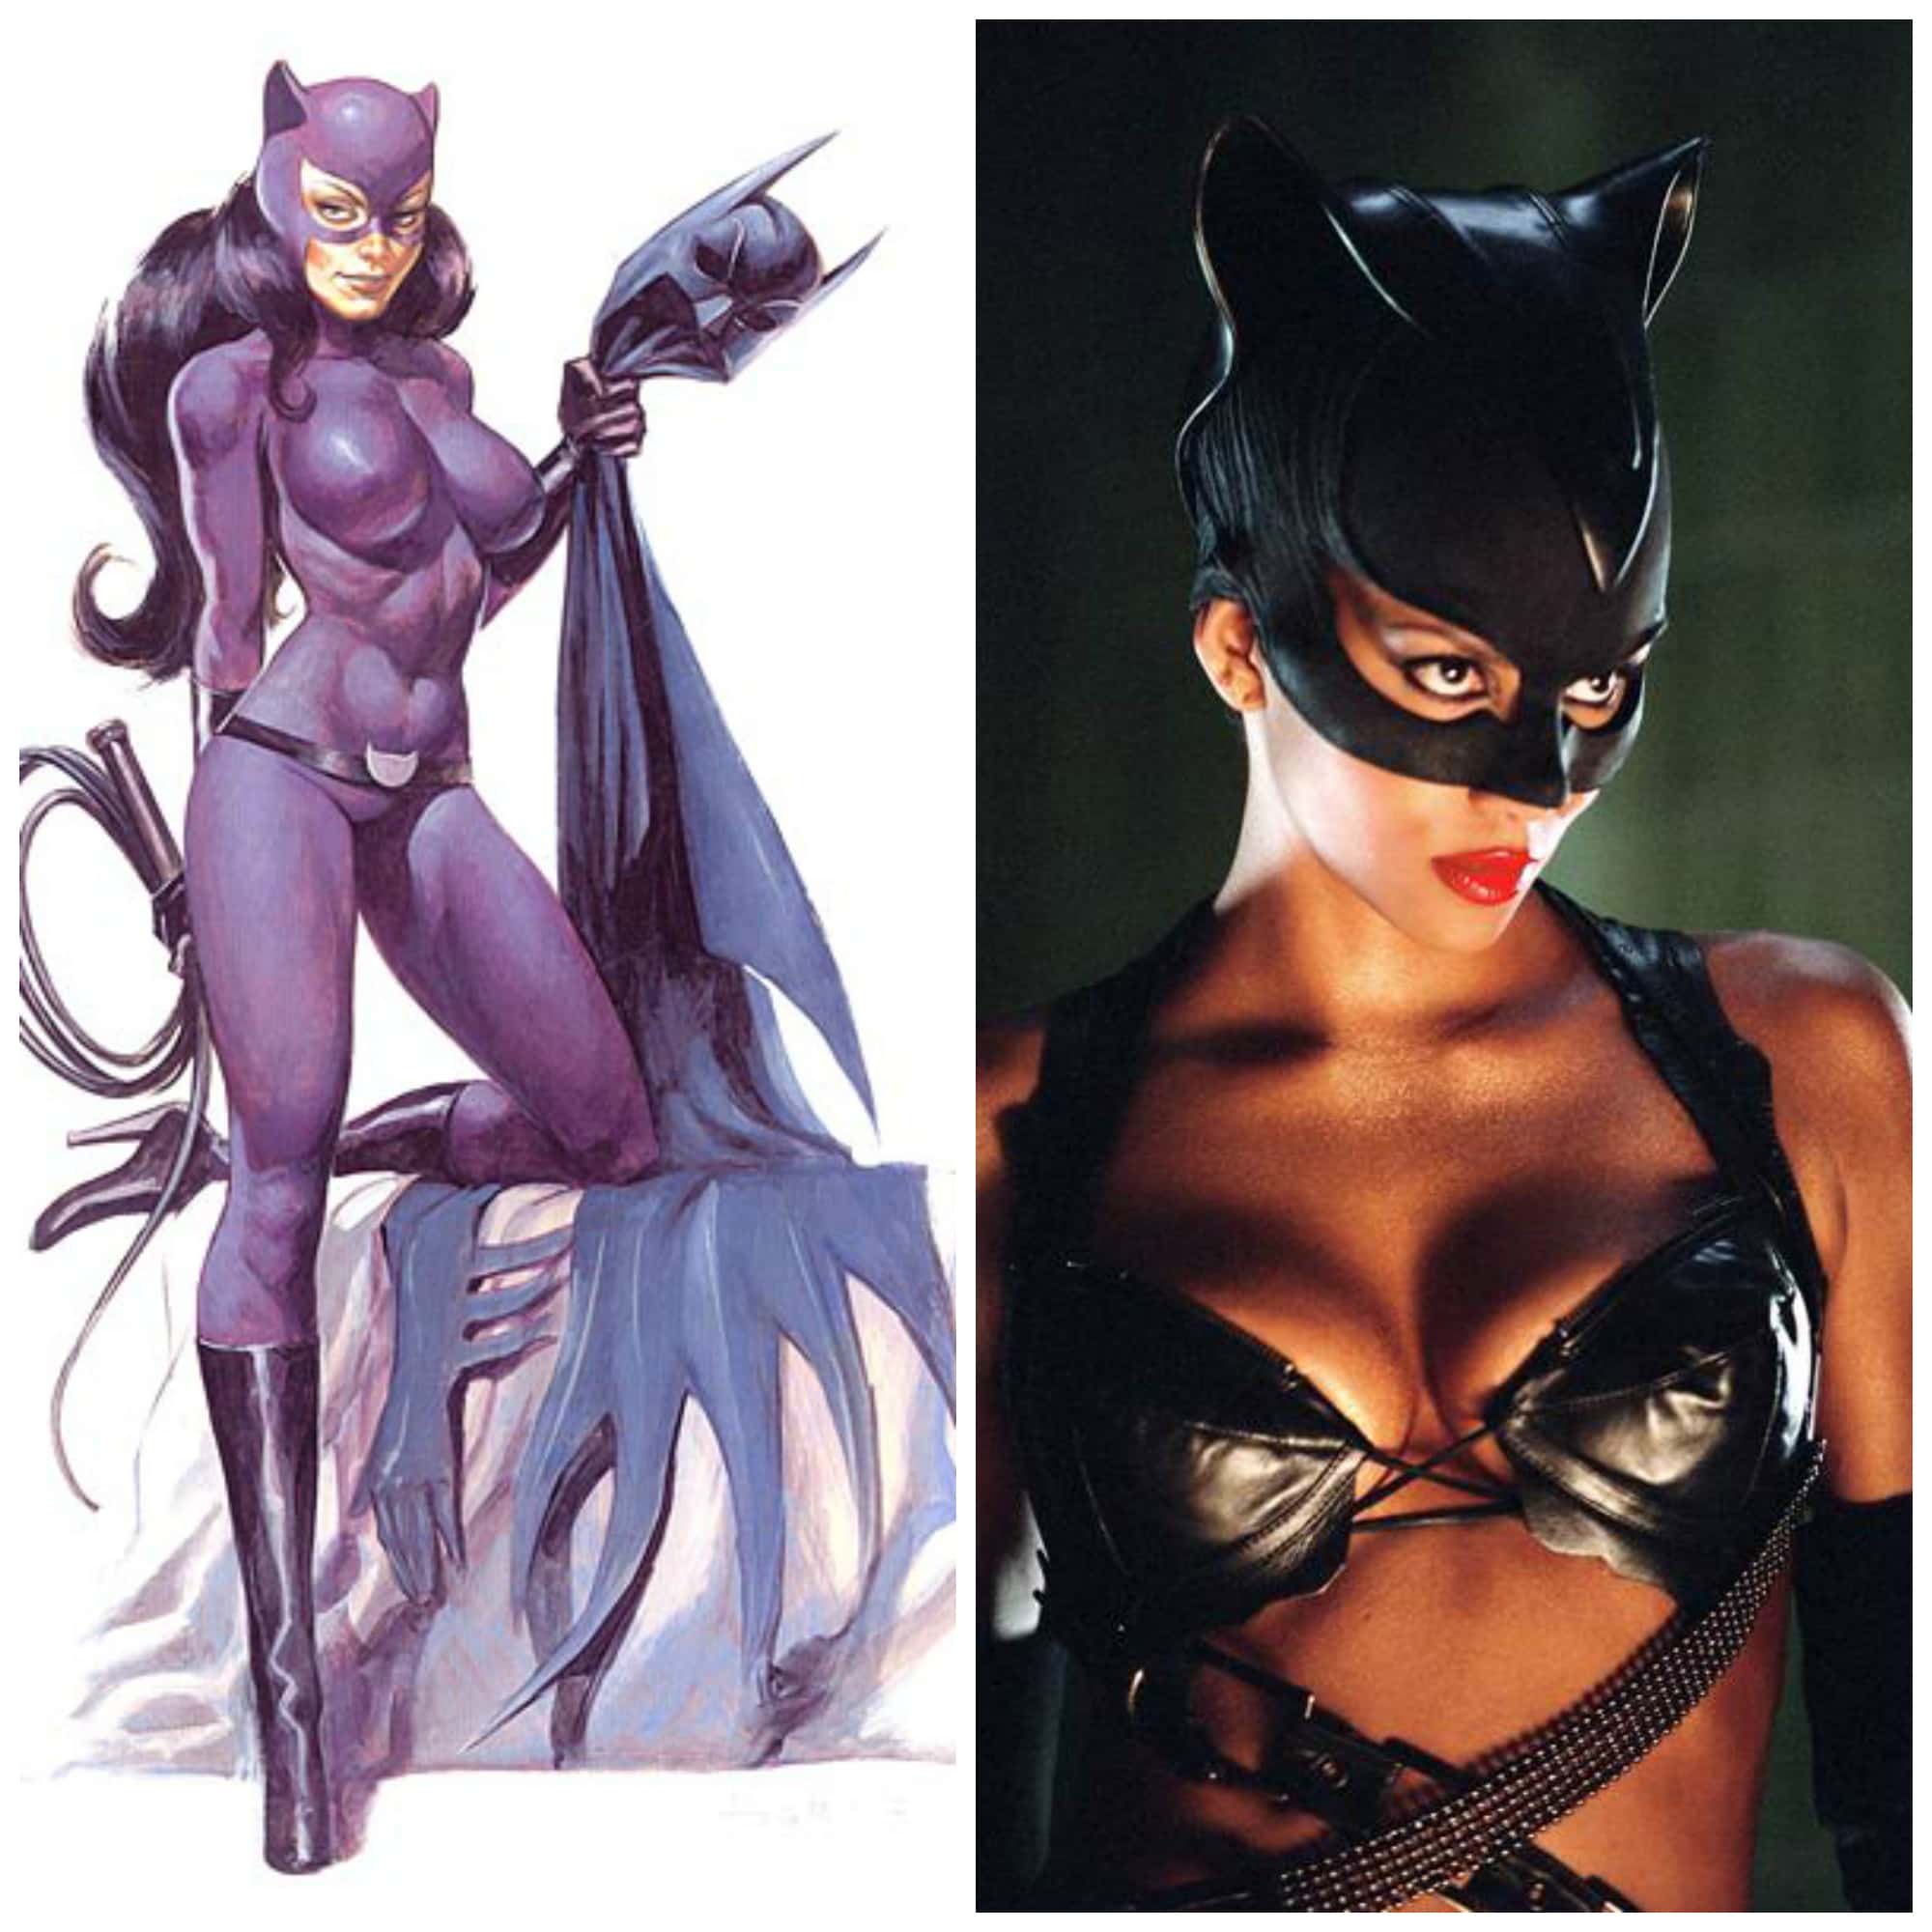 catwoman played by Halle Berry